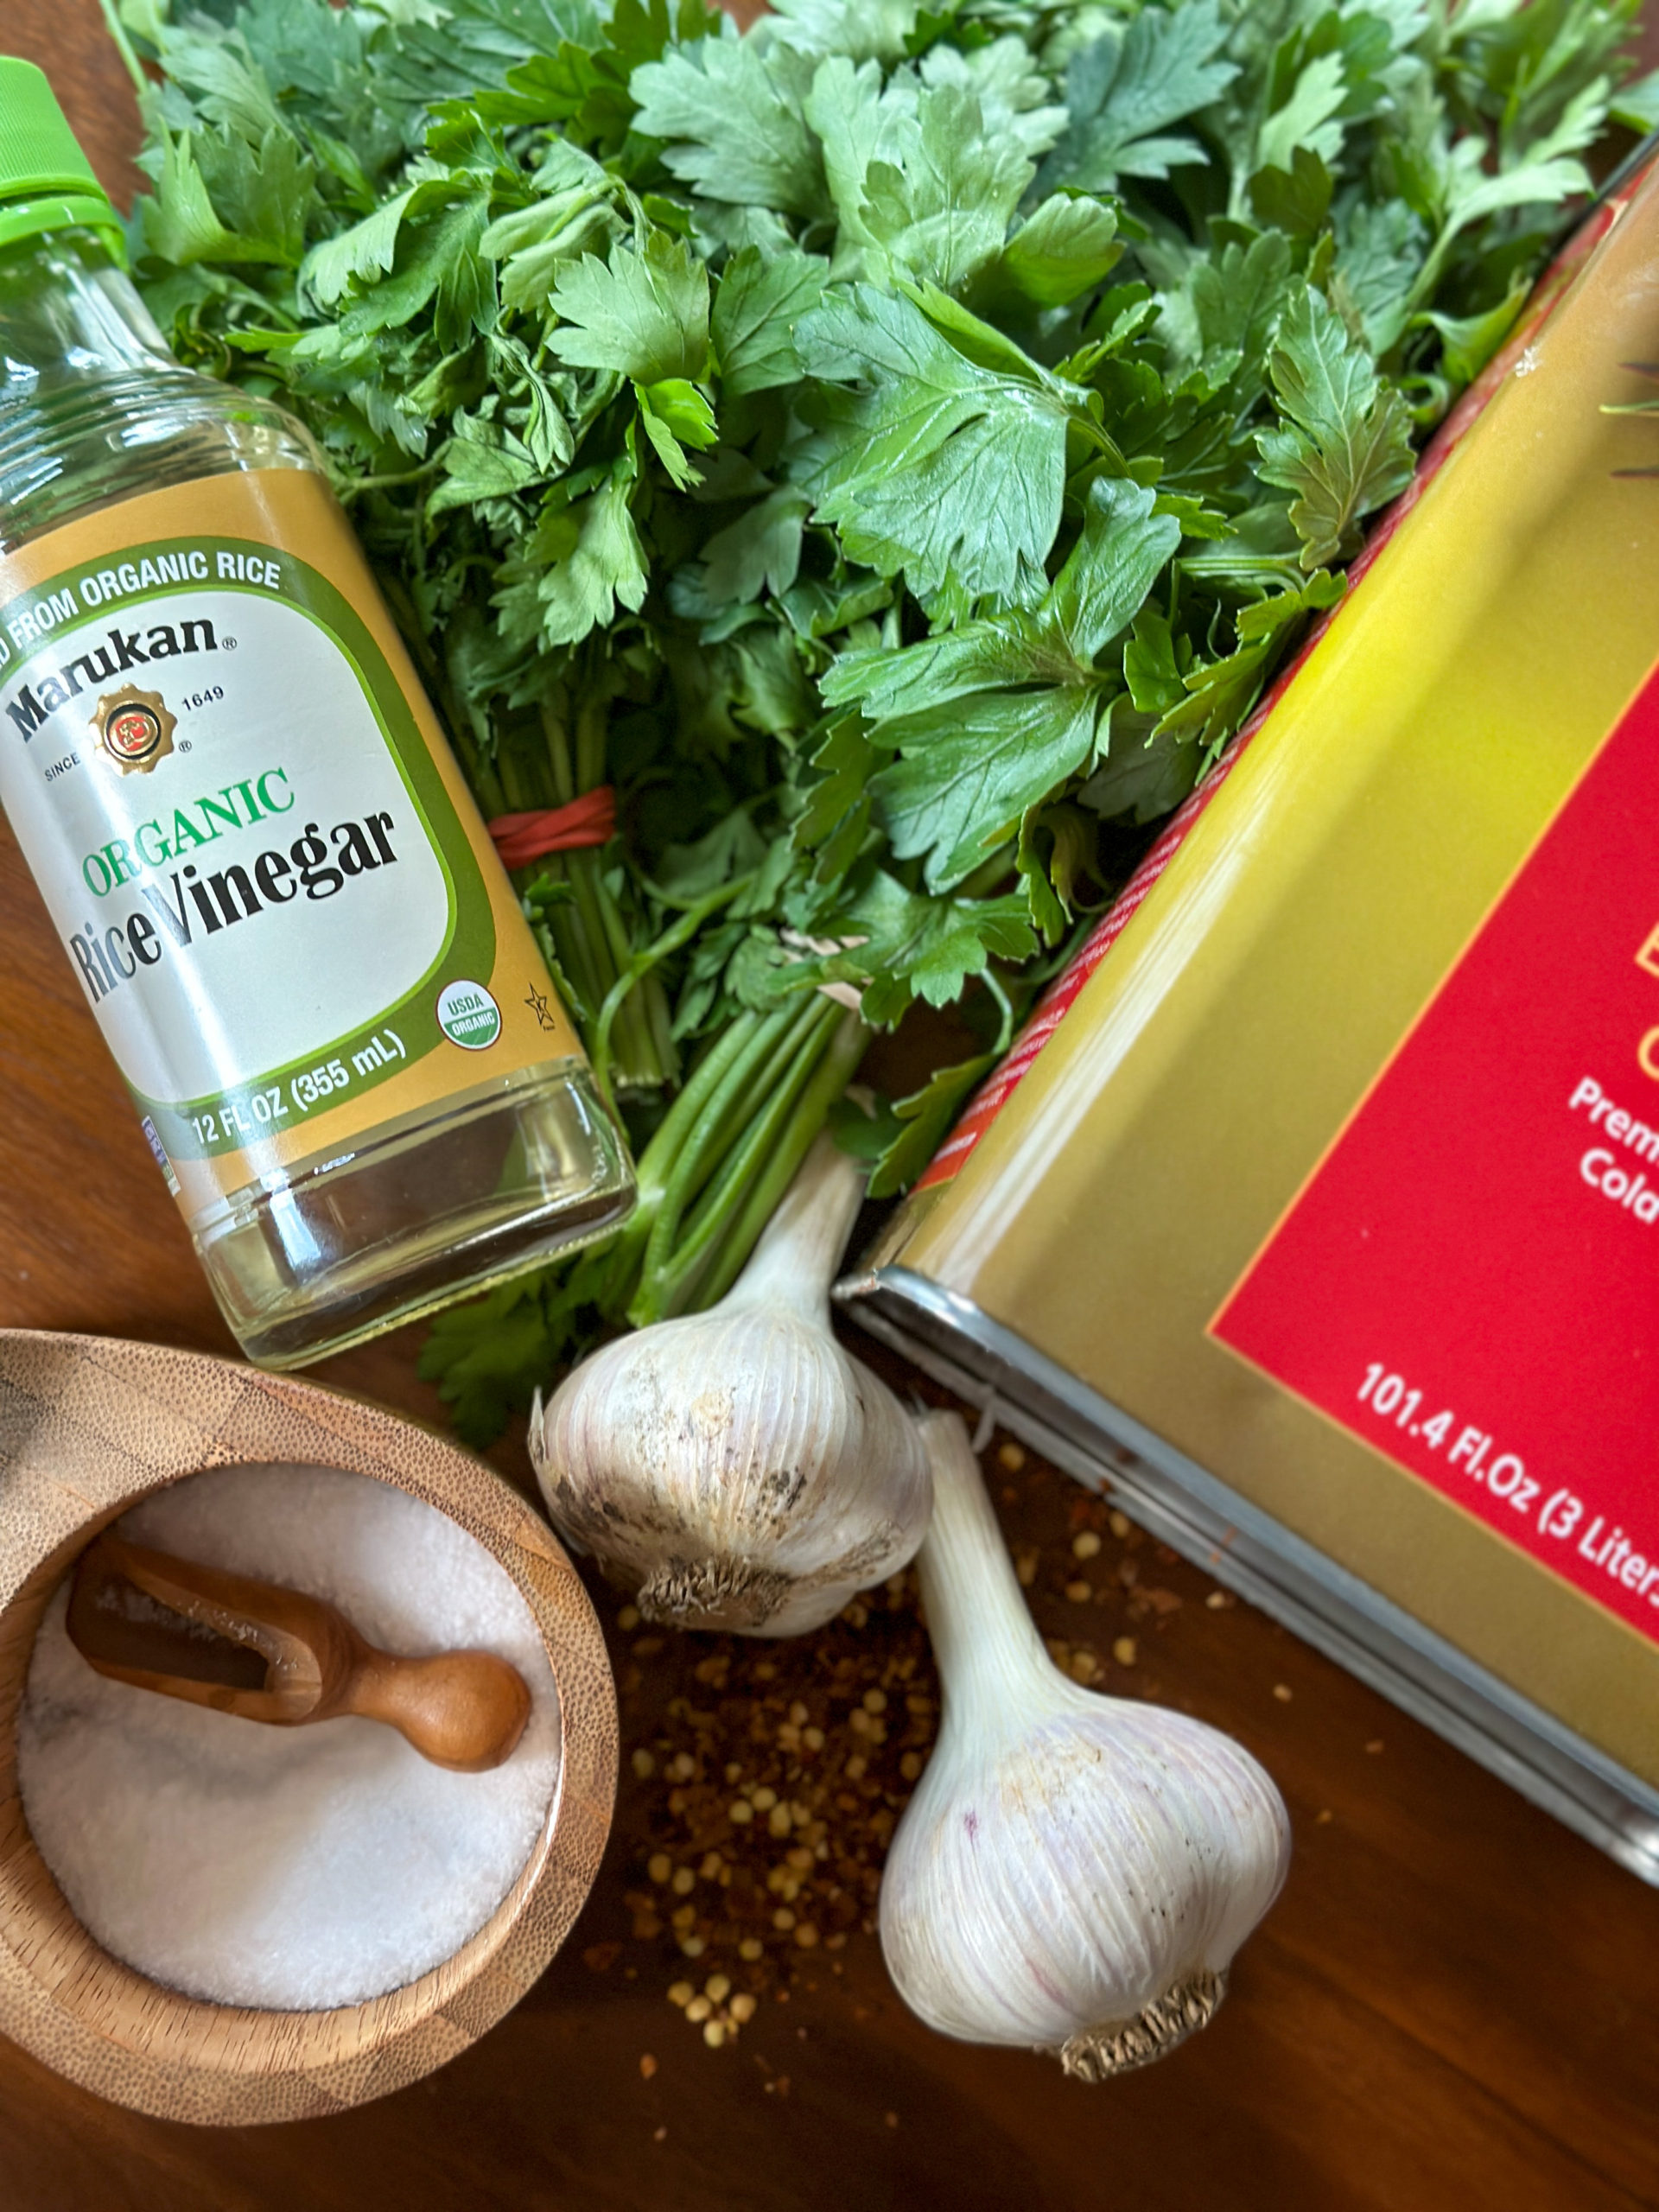 Ingredients for Chimichurri